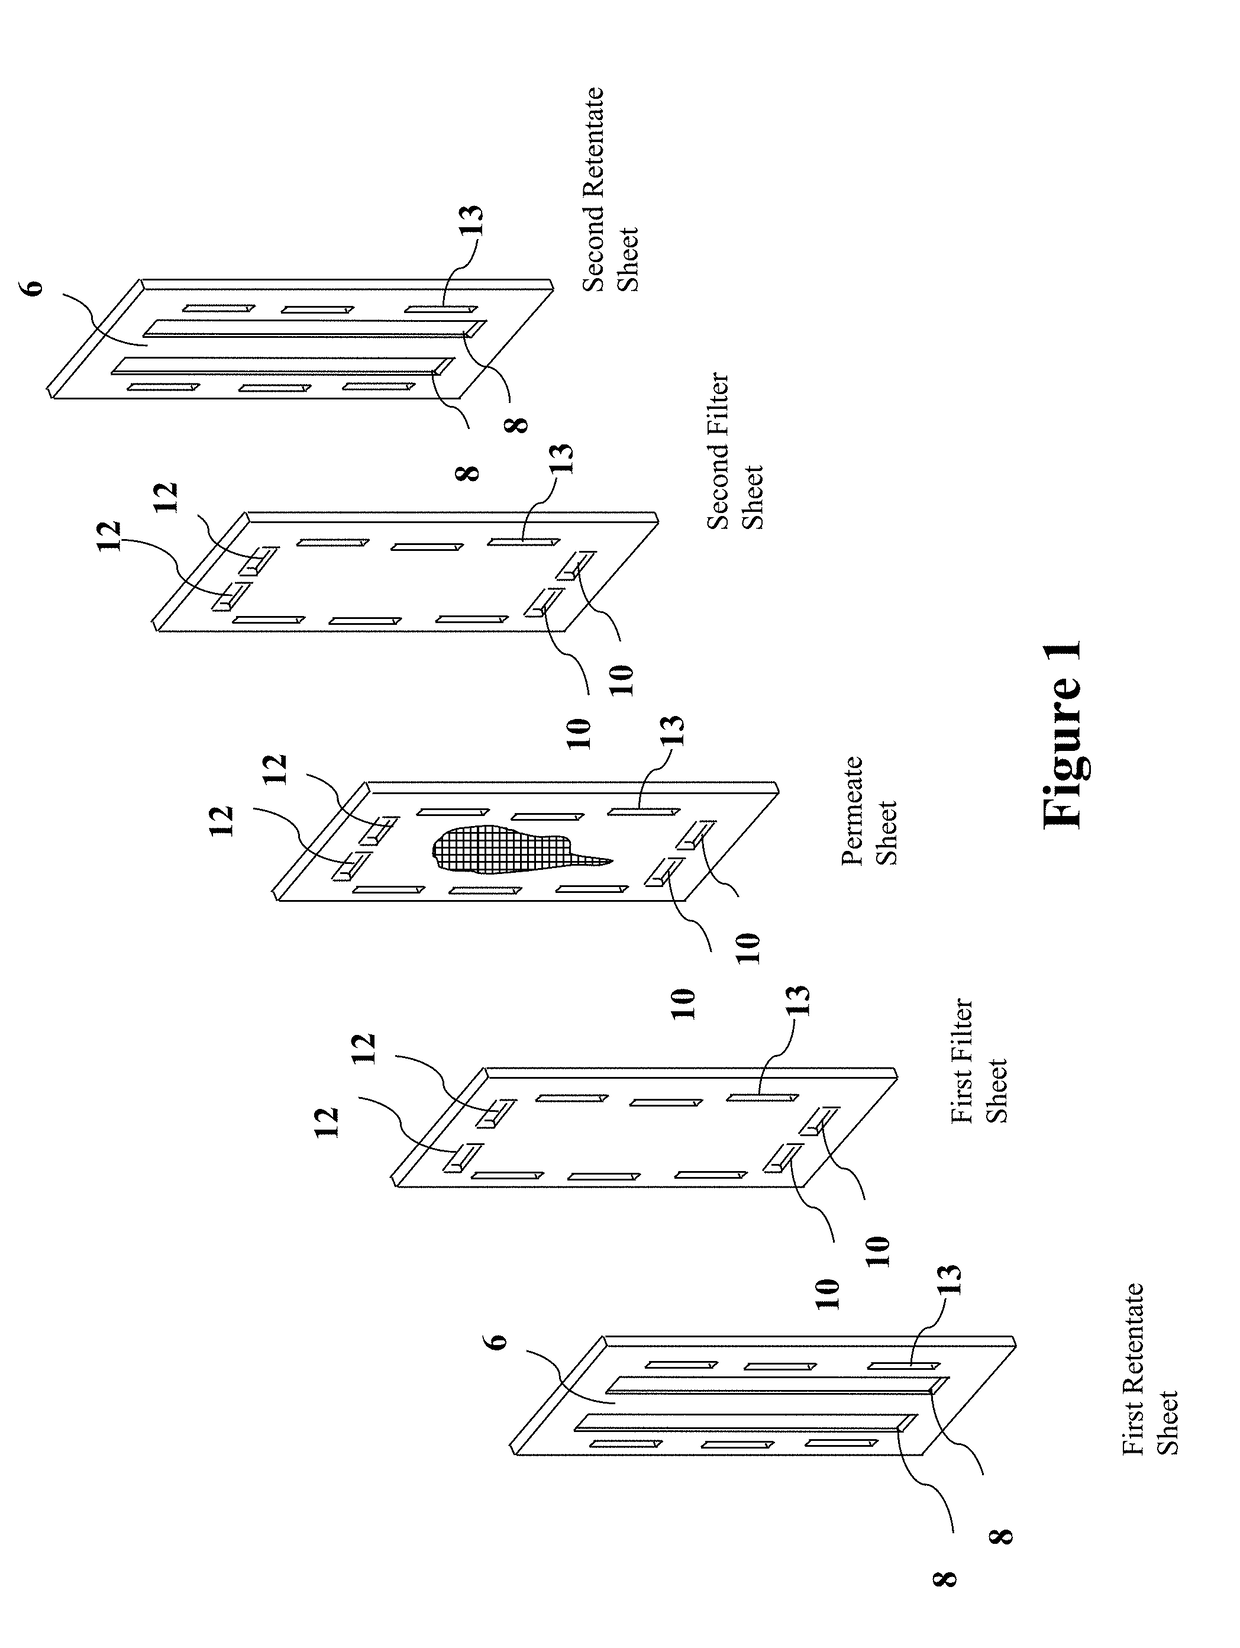 Method and systems for isolation and/or separation of target products from animal produced waste streams